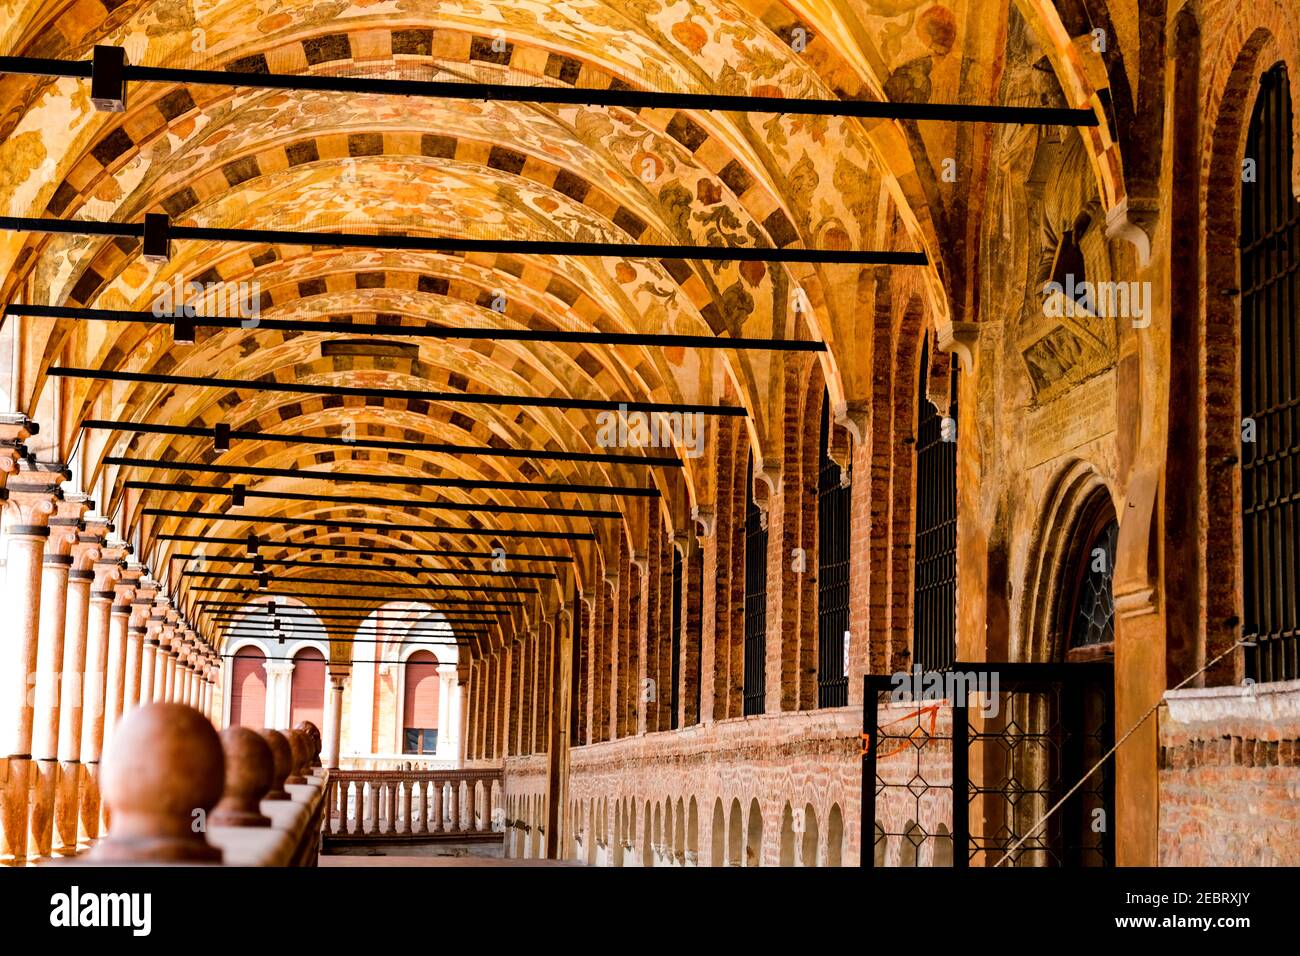 The frescoed ceiling of the entrance to Palazzo della Ragione in Padua Italy Stock Photo